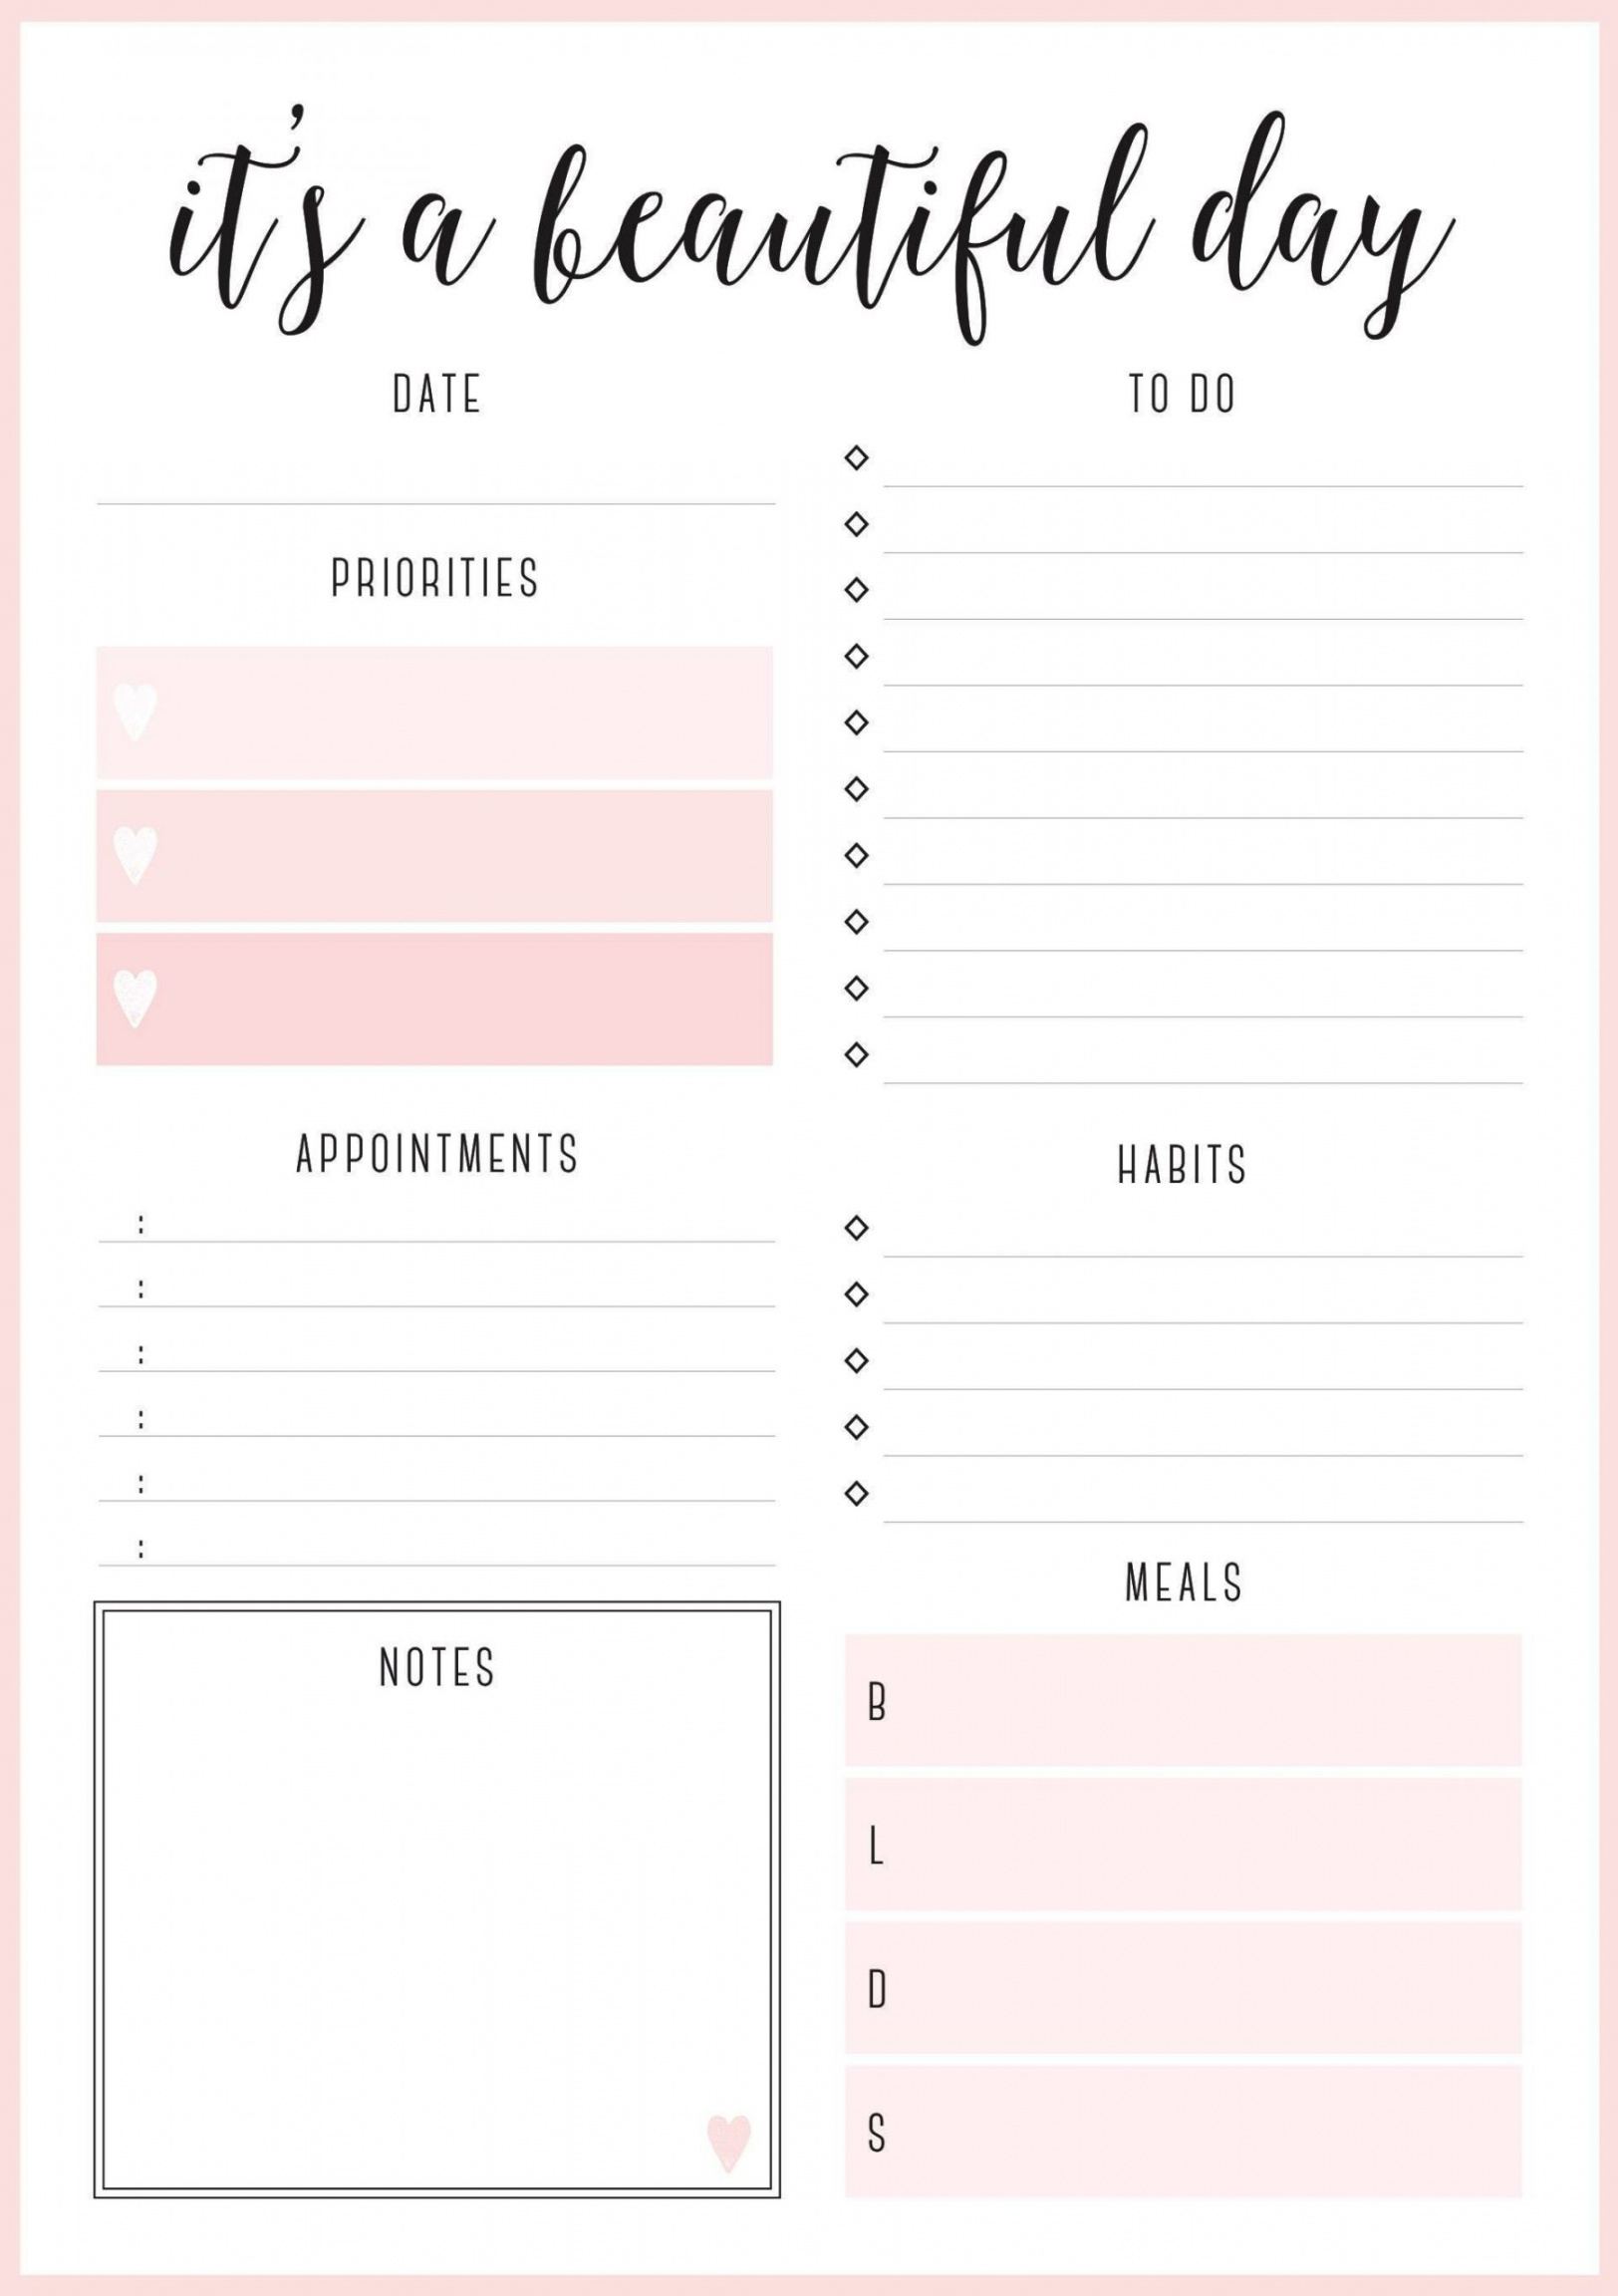 sample free printable daily planner template for excel pdf word goodnotes daily agenda template sample